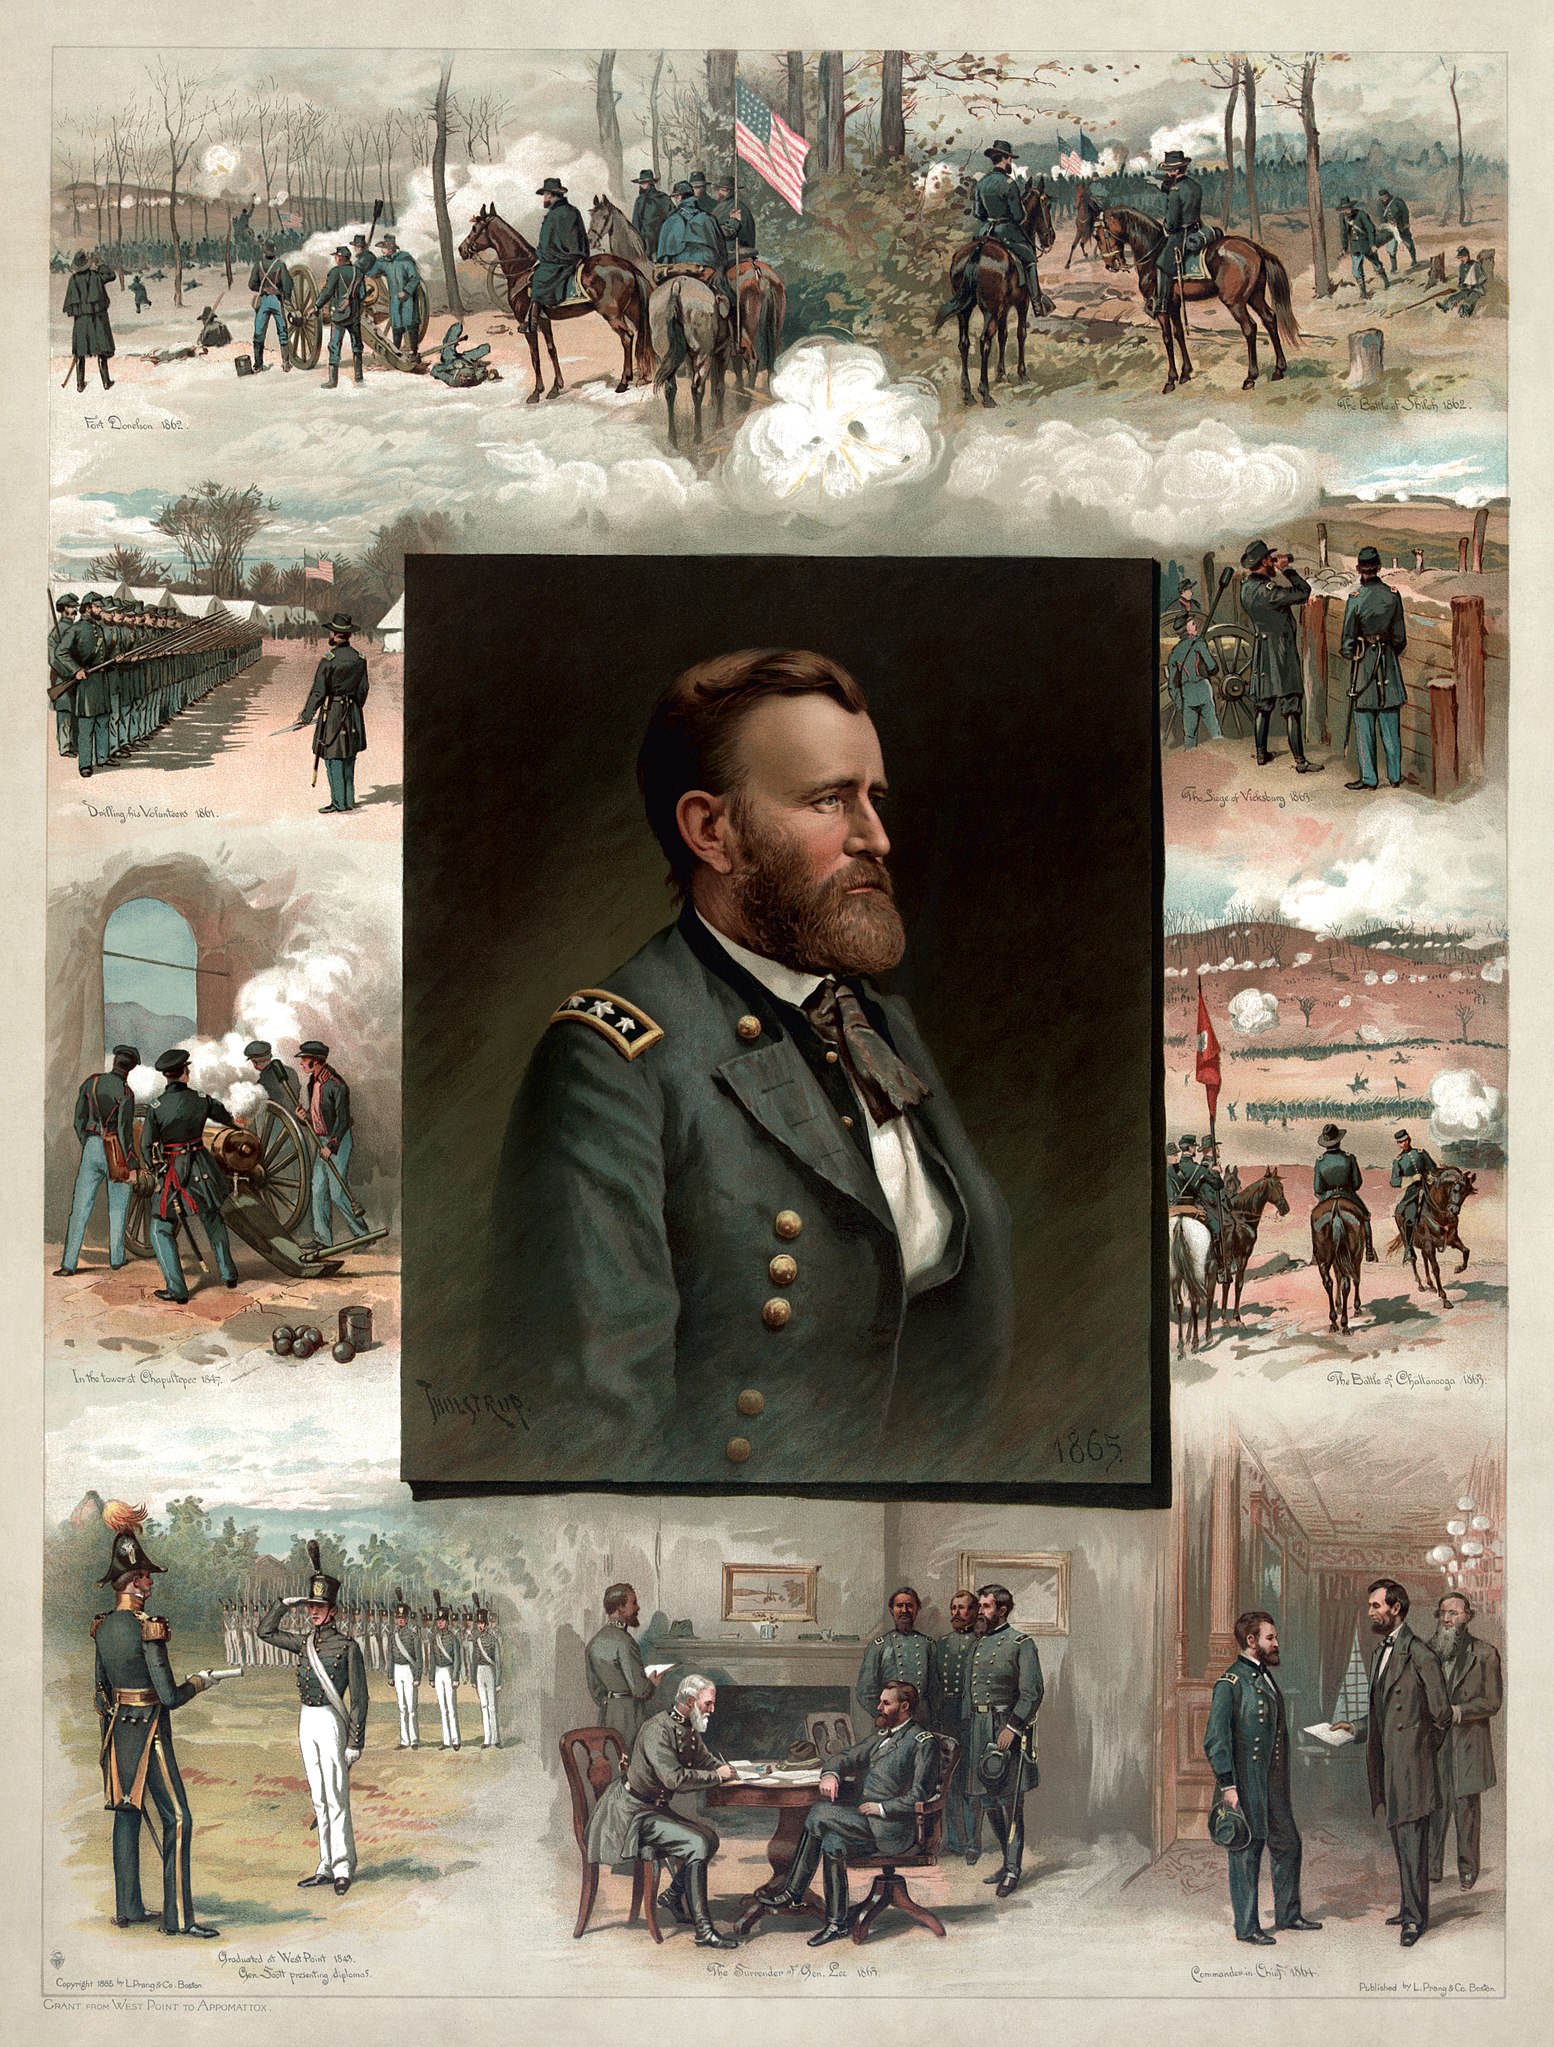 Thure_de_Thulstrup._Ulysses_S._Grant_from_West_Point_to_Appomattox.jpg